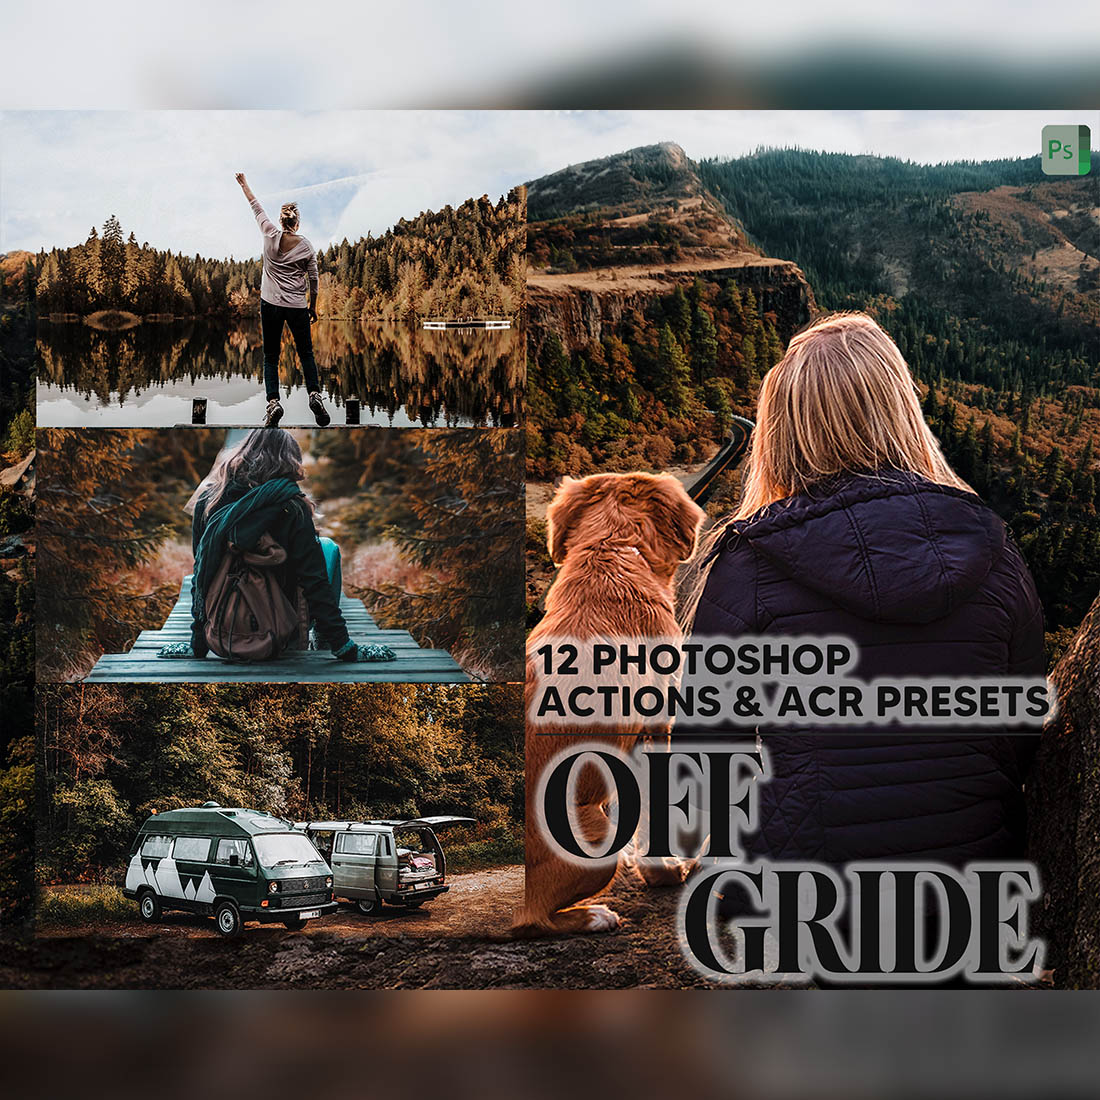 12 Photoshop Actions, Off Gride Ps Action, Moody ACR Preset, Nature Ps Filter, Atn Portrait And Lifestyle Theme For Instagram Blogger cover image.